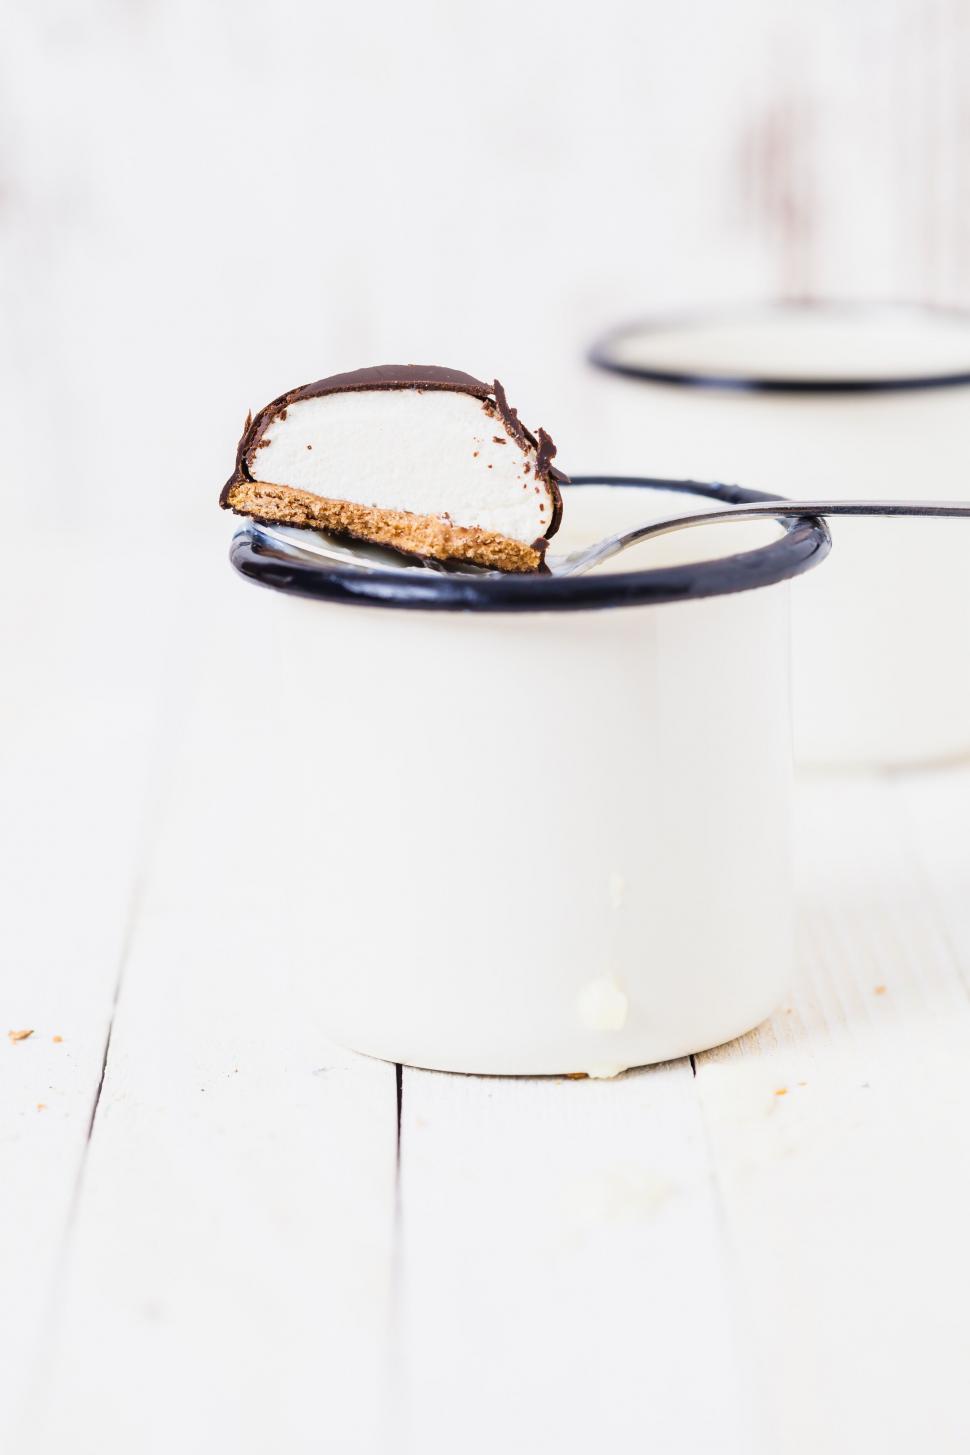 Free Image of A spoon in a mug with a piece of cheesecake 